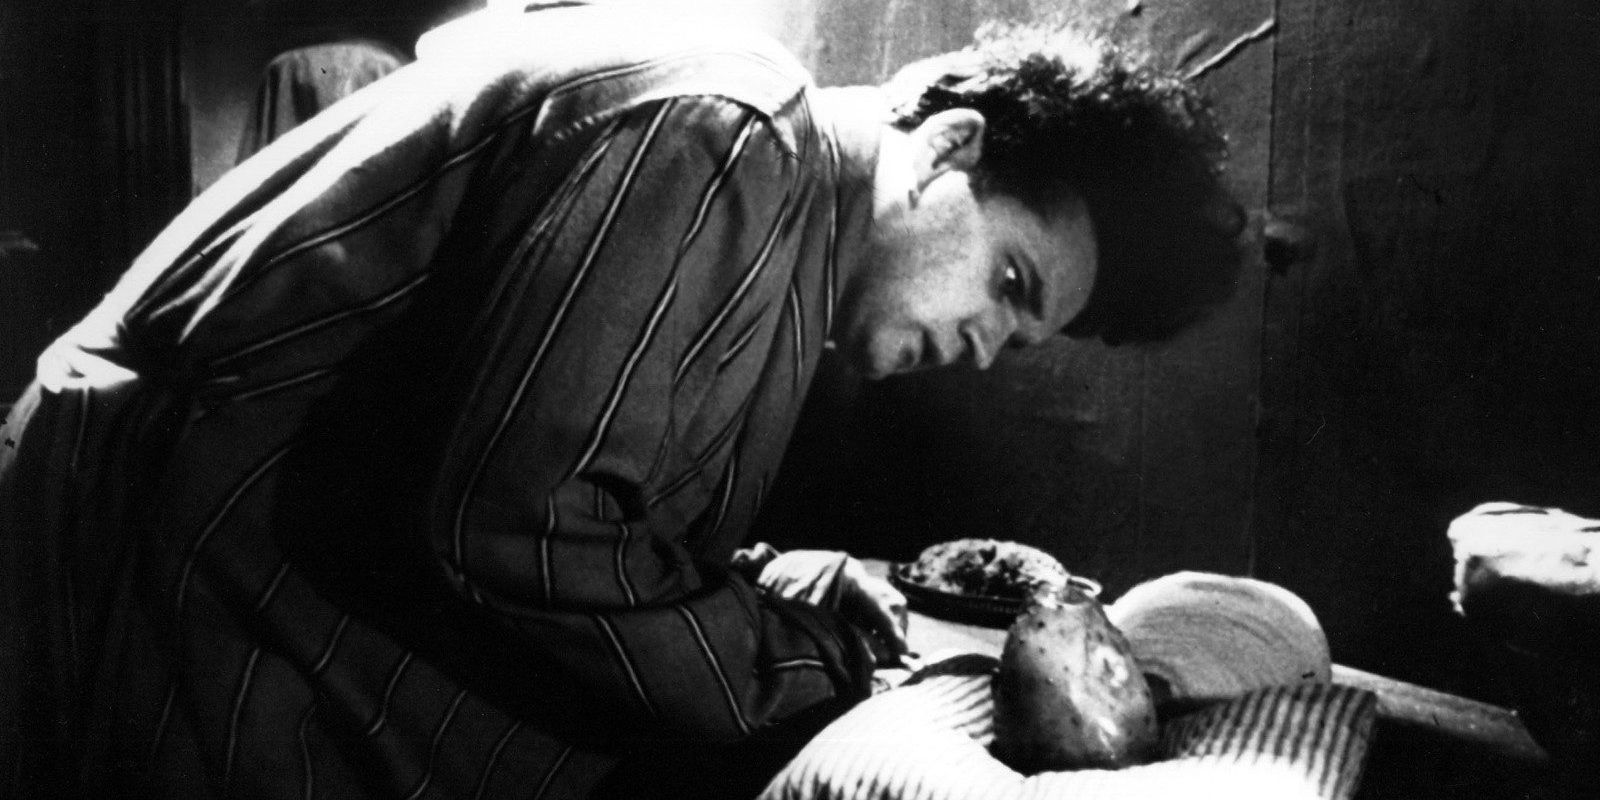 Eraserhead: Henry Spencer looking at the deformed baby.